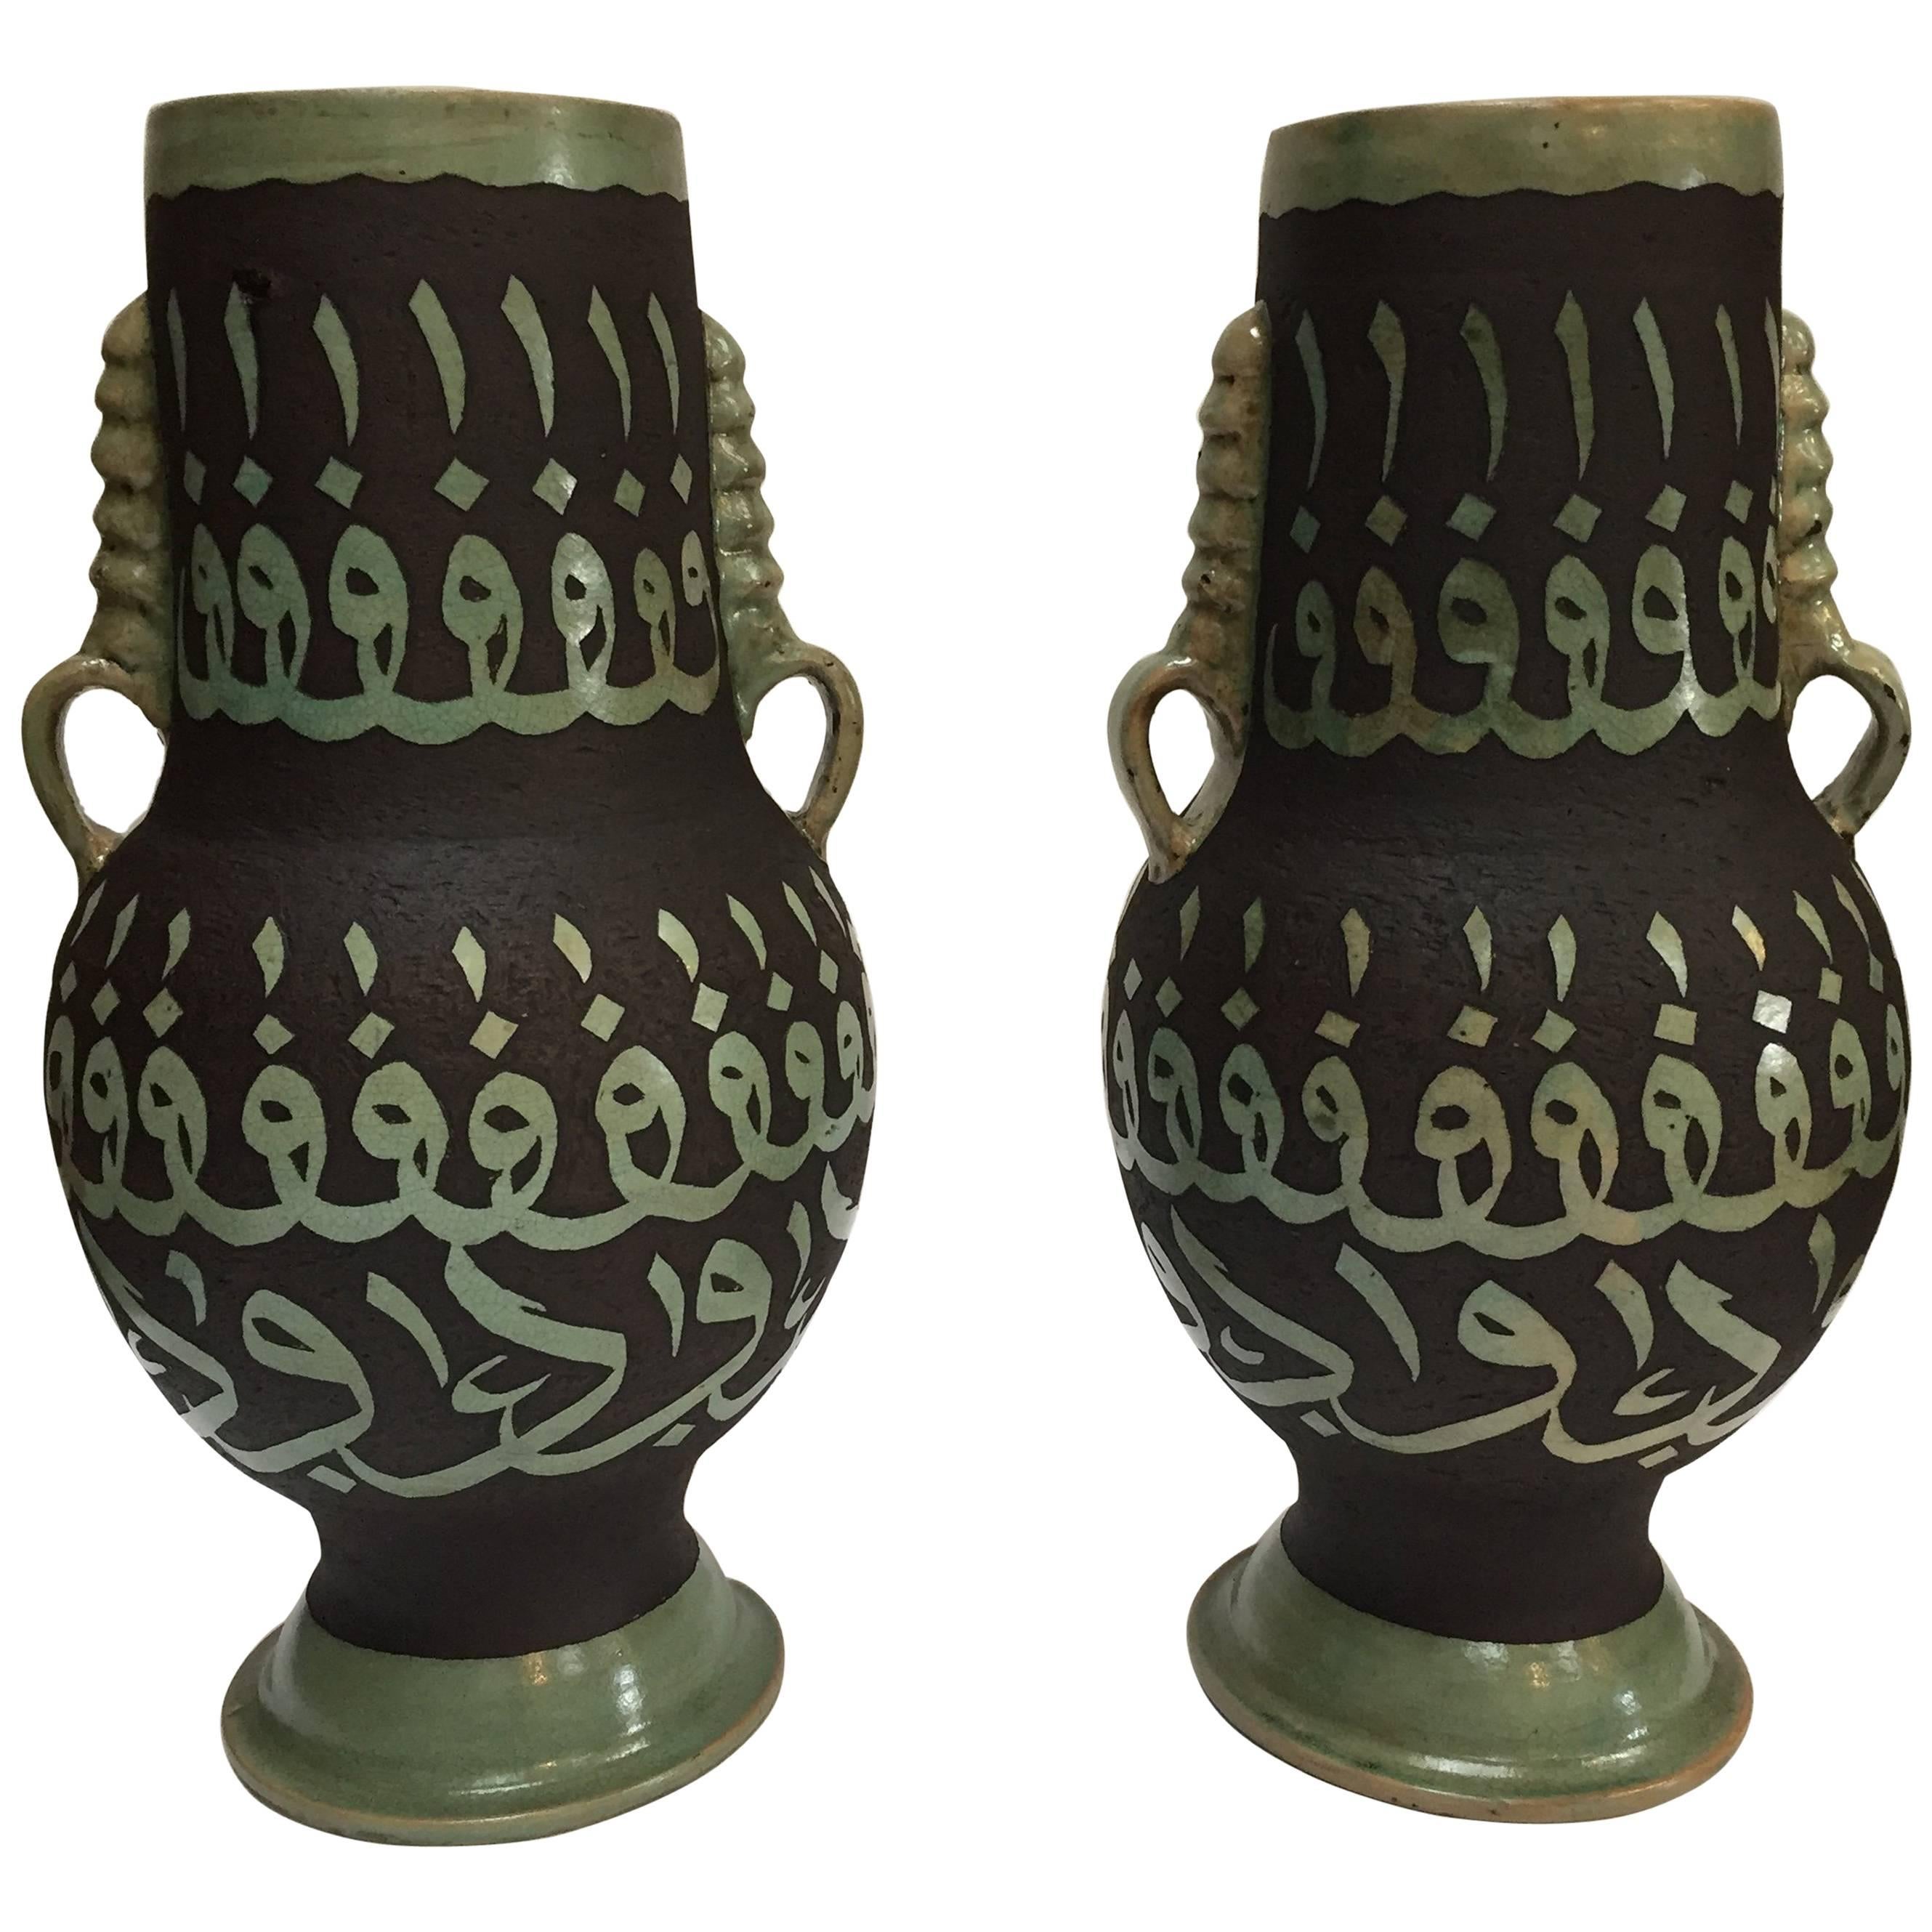 Pair of Green Moroccan Ceramic Vases with Chiseled Arabic Calligraphy Writing For Sale